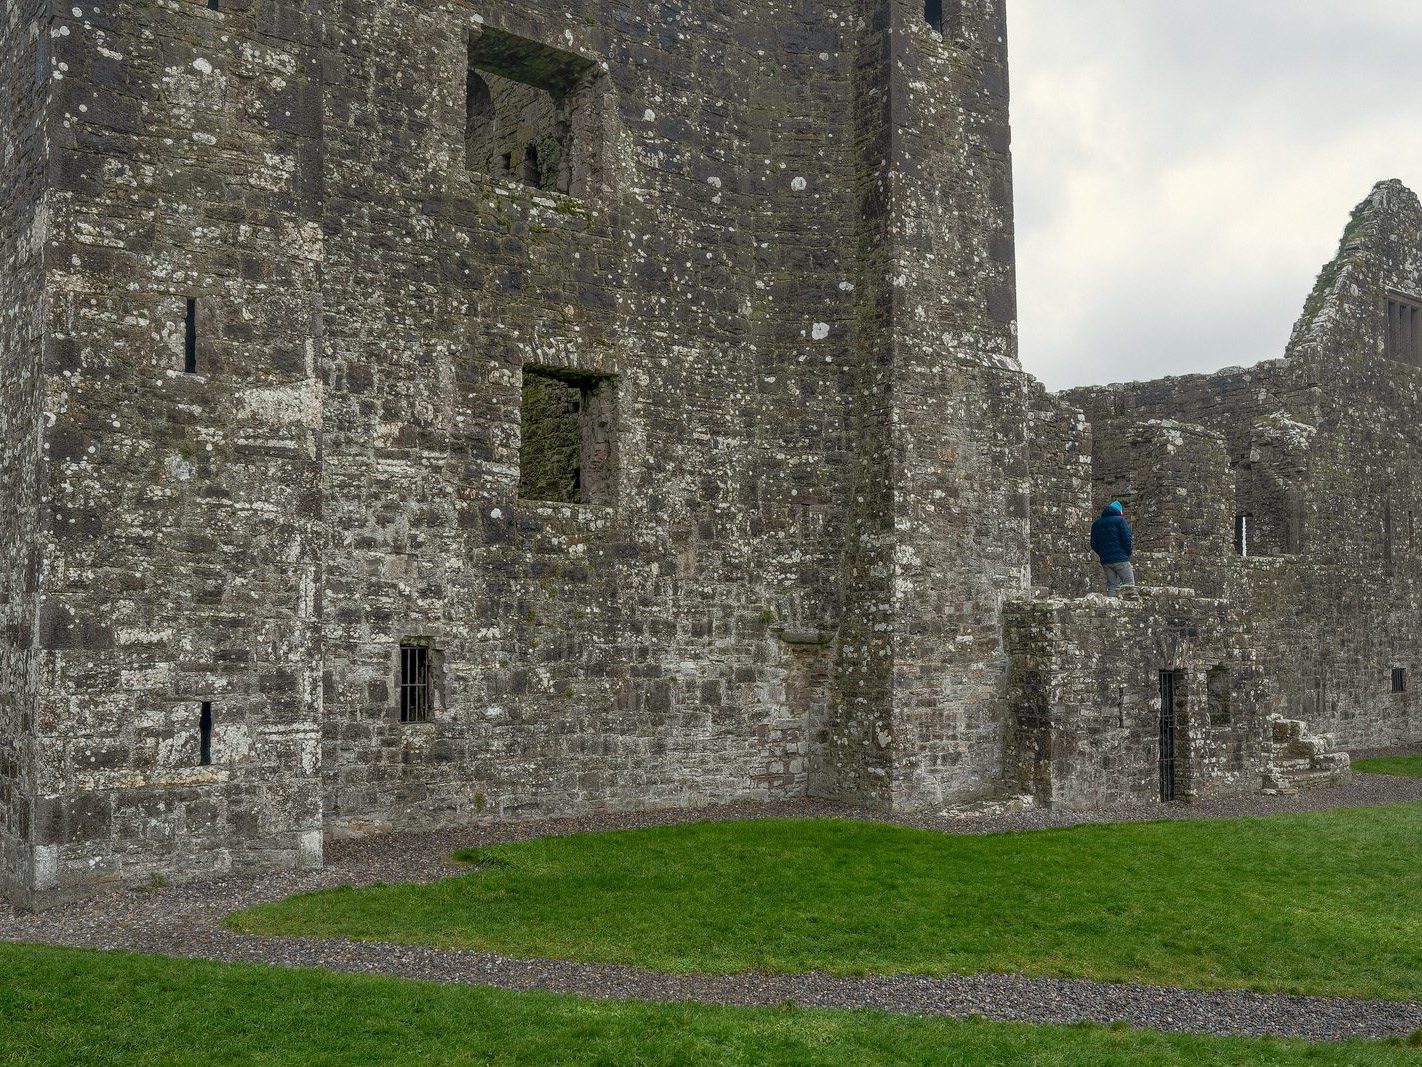 BECTIVE ABBEY WHICH I VISITED LAST CHRISTMAS [THERE WERE NO OTHER VISITORS AS IT WAS A VERY WET DAY]--225254-1